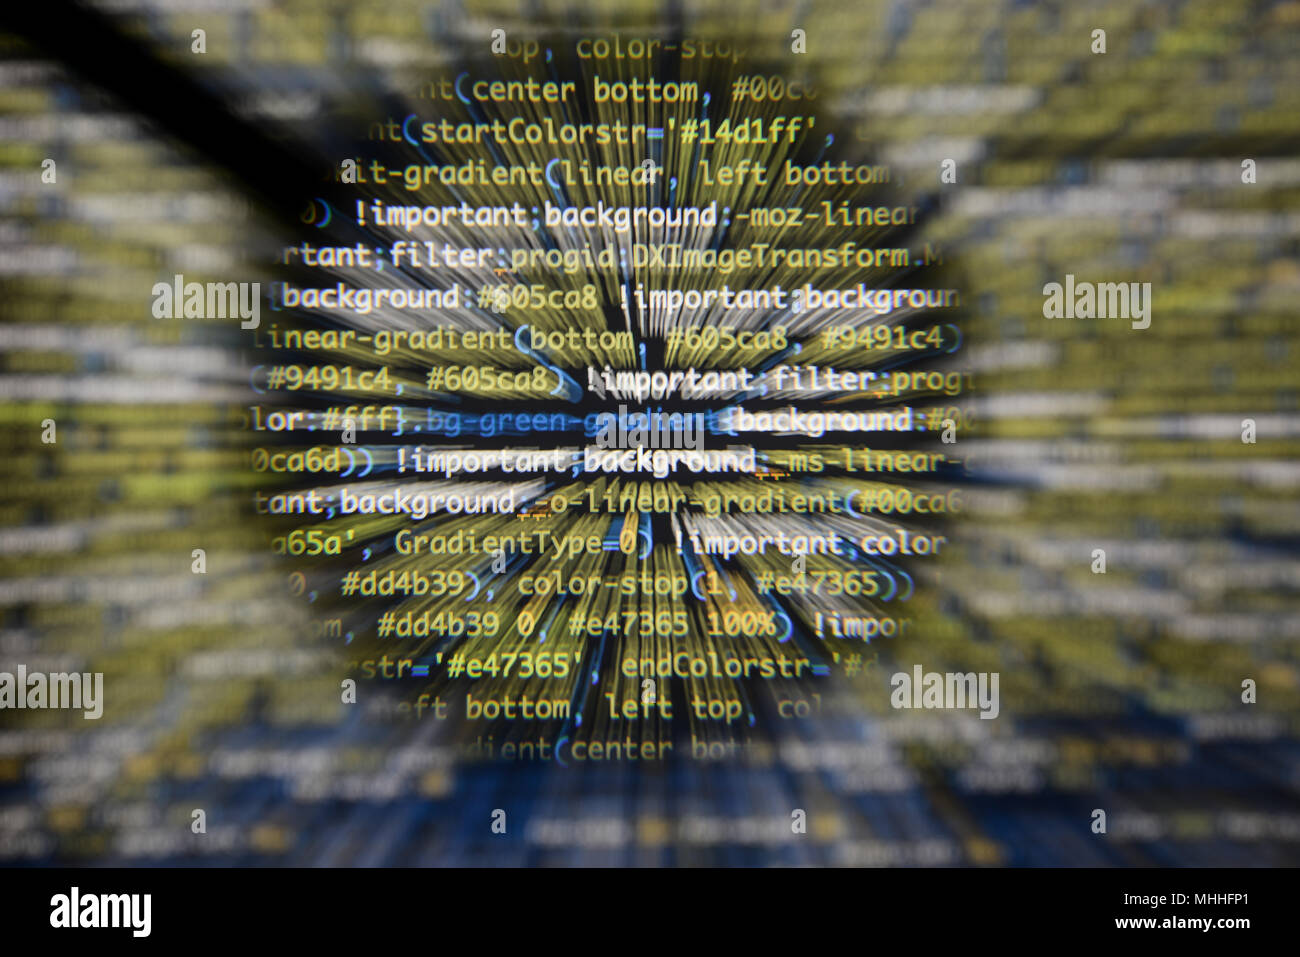 Real css code developing screen. Programing workflow abstract algorithm concept. Lines of css code visible under magnifying lens with moviment effect. Stock Photo